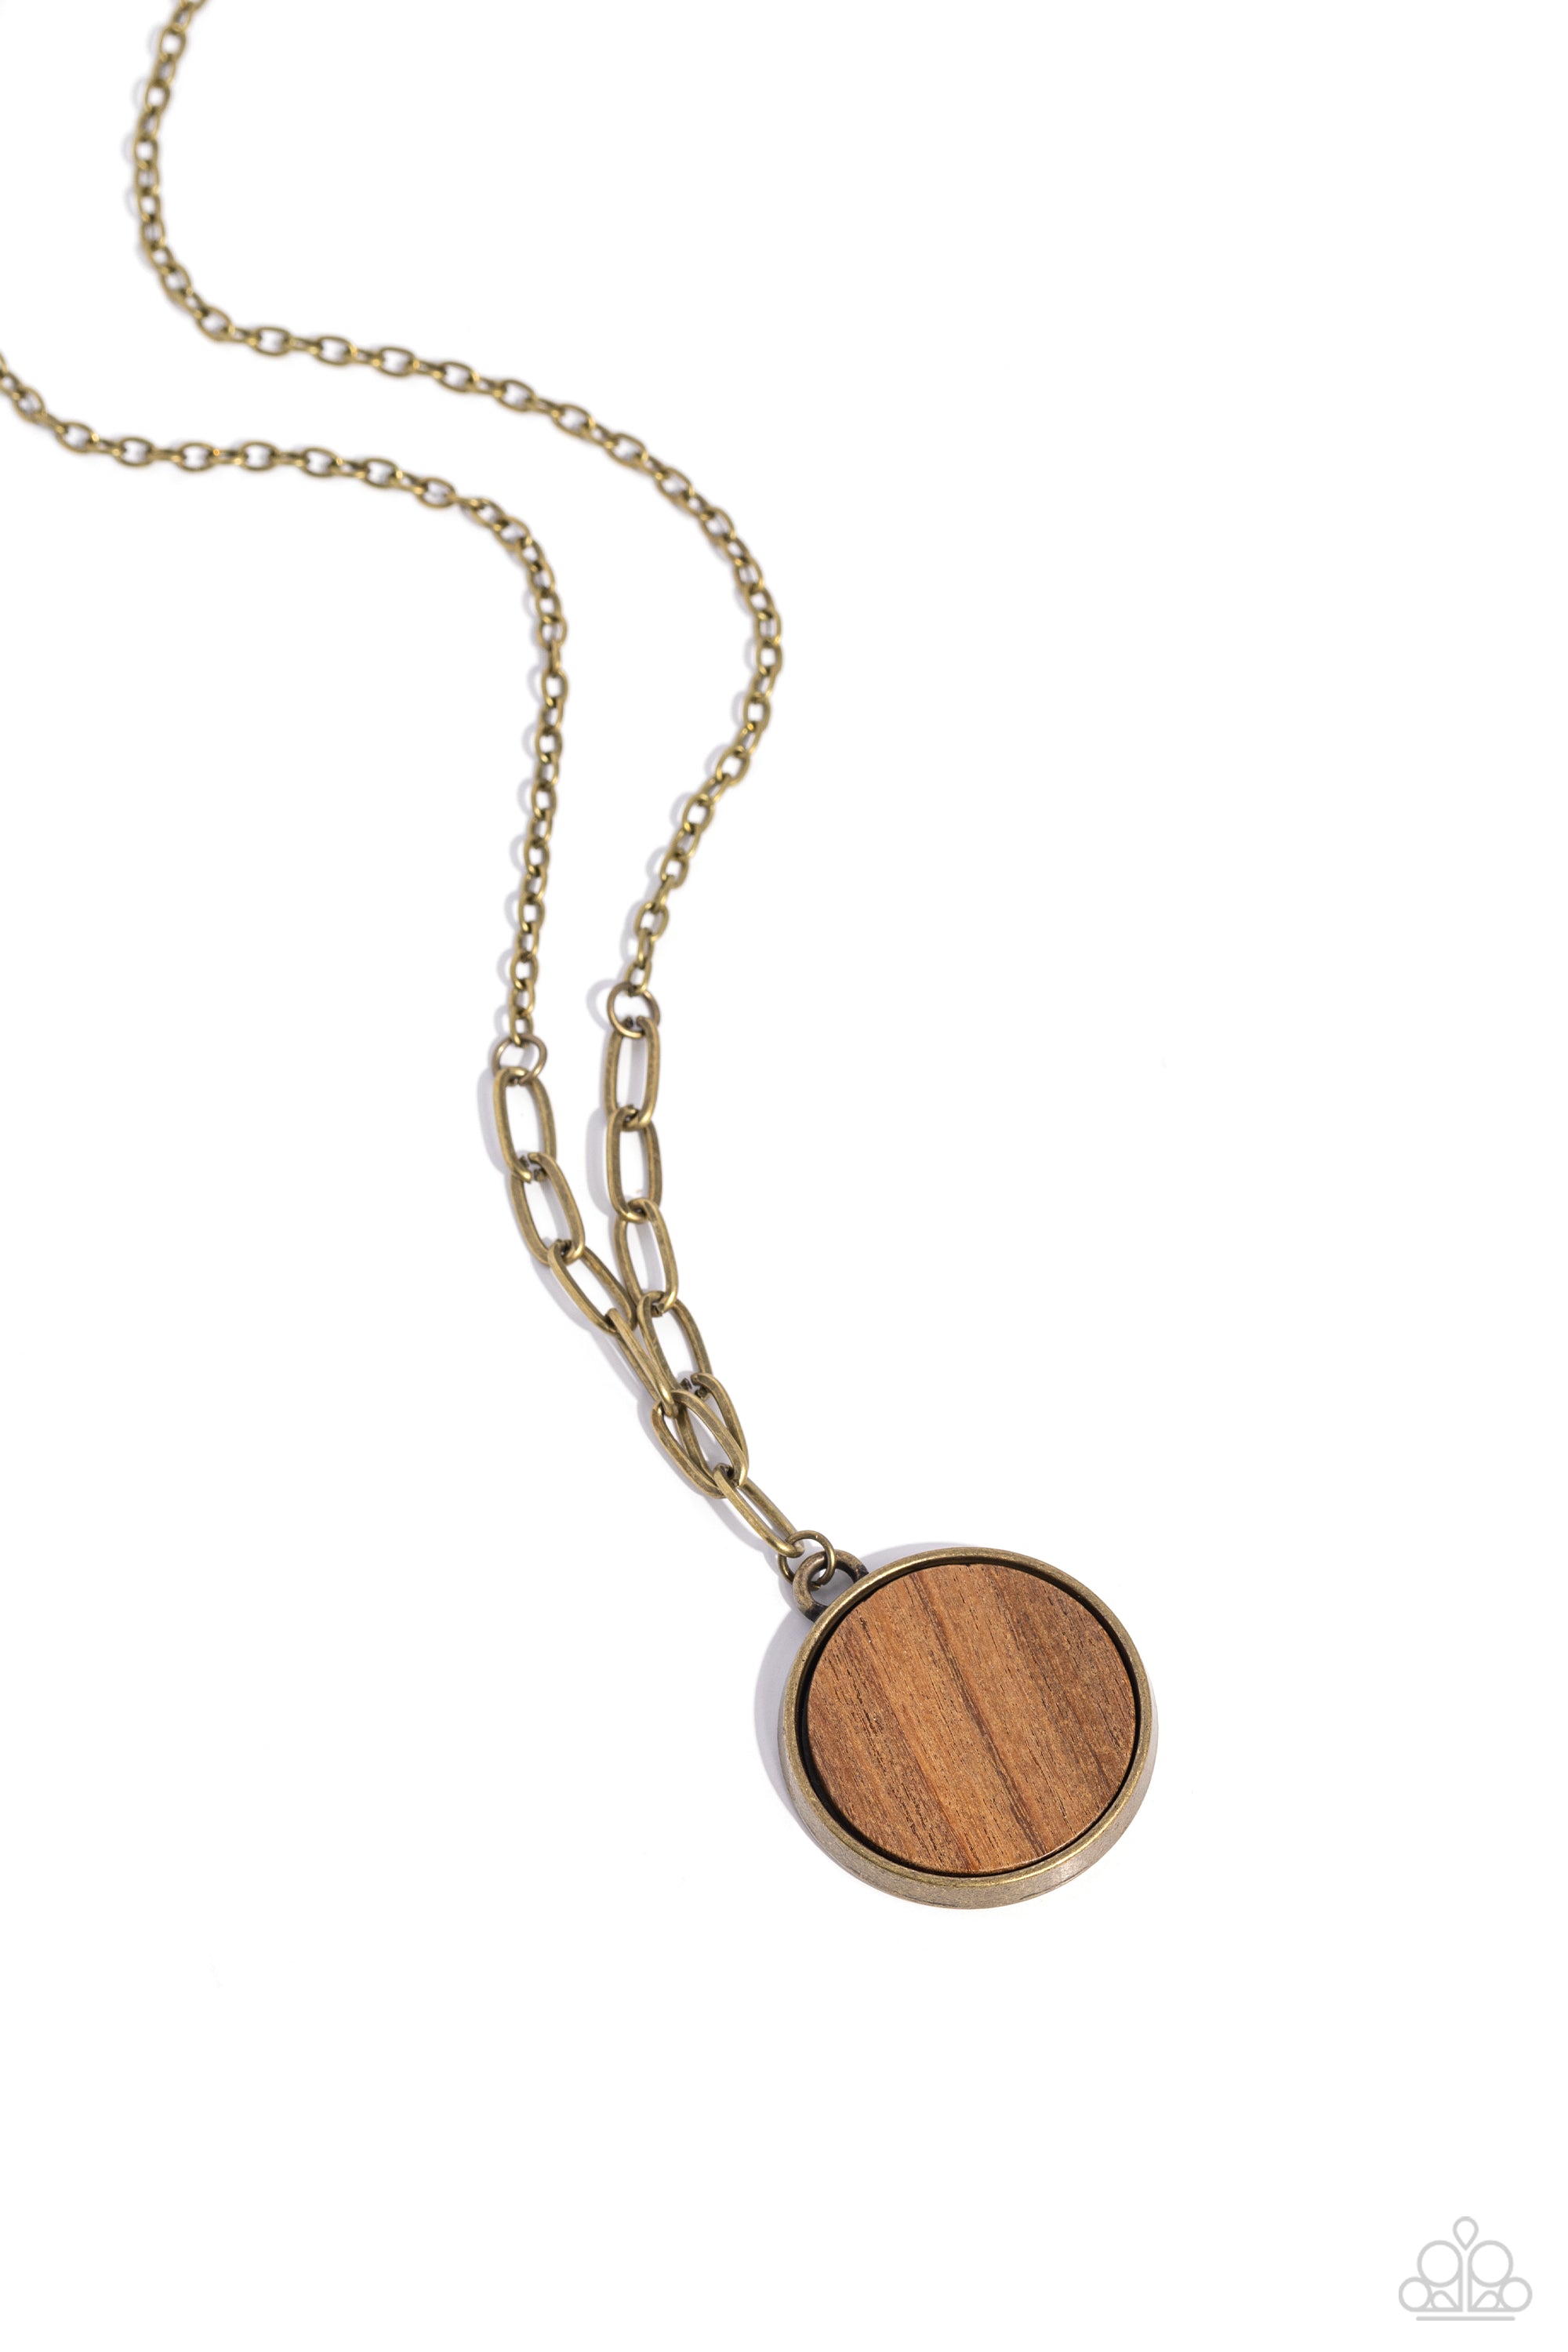 WOODNT DREAM OF IT BRASS-NECKLACE